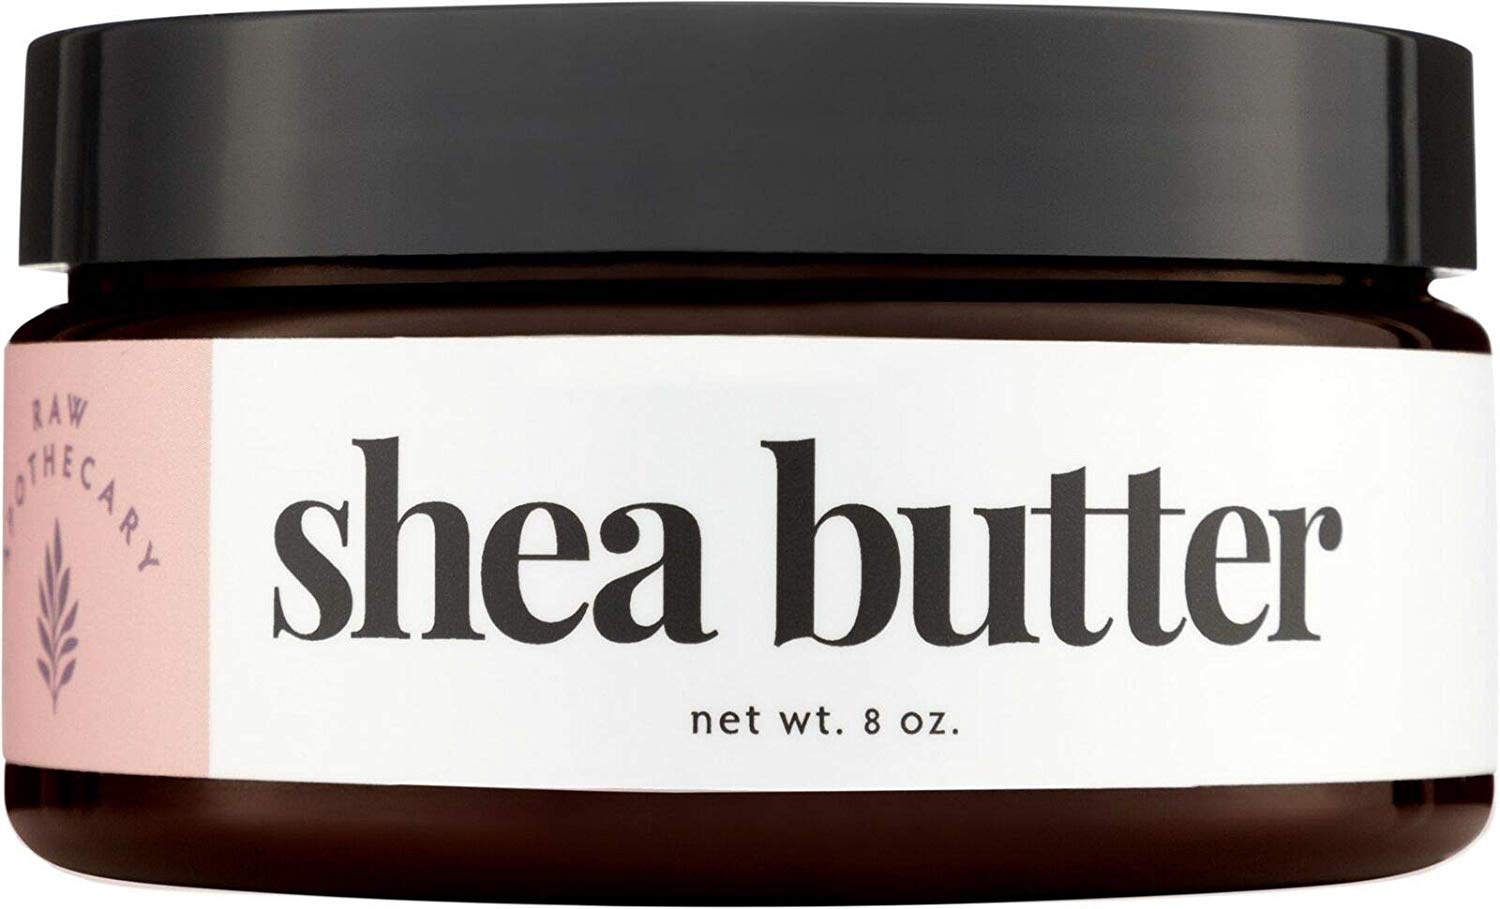 Raw Apothecary Shea Butter